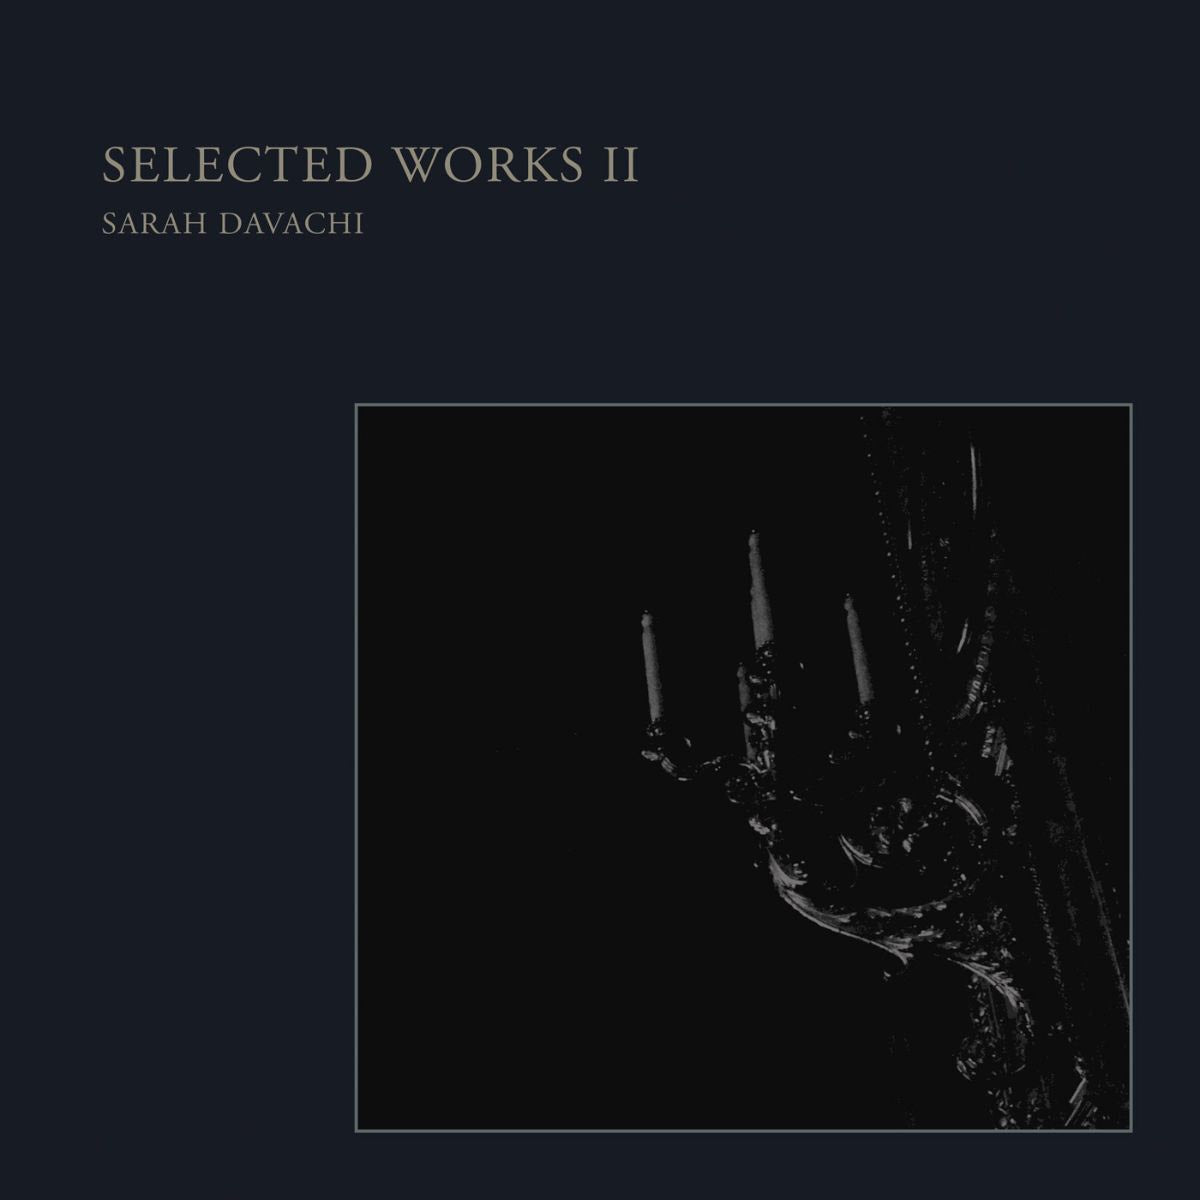 Sarah Davachi - Selected Works II | Buy the Vinyl LP from Flying Nun Records 